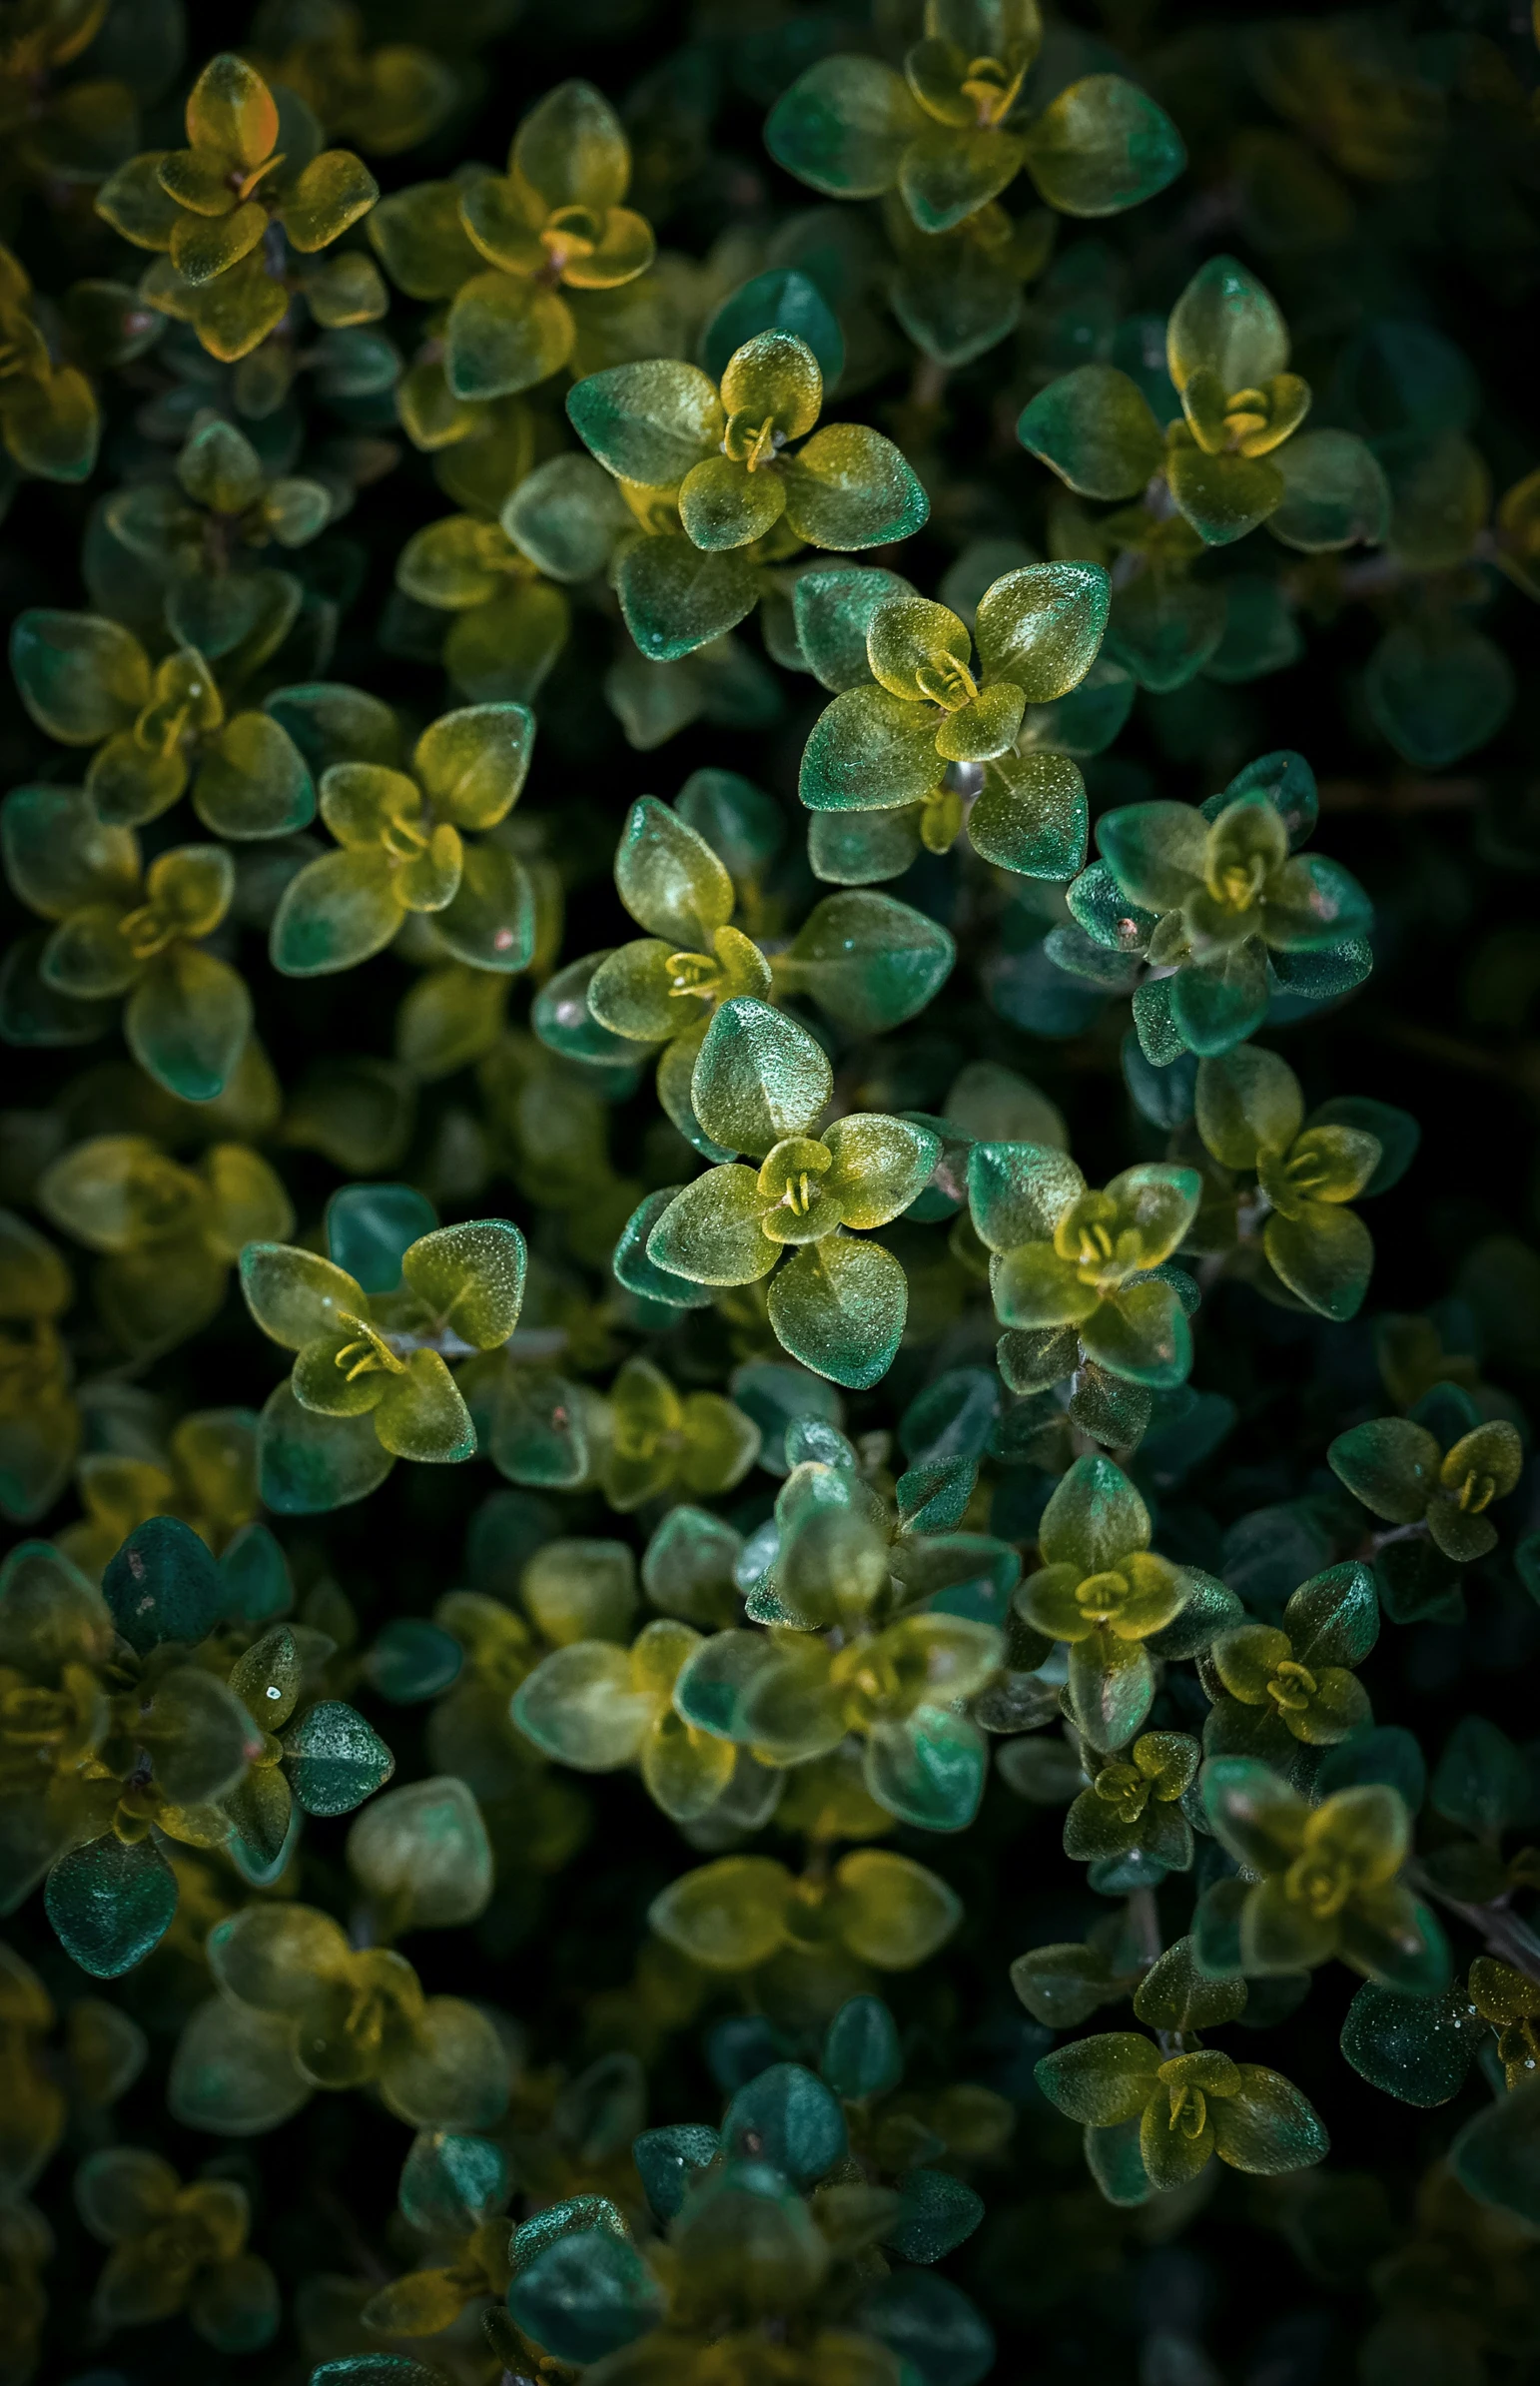 abstract view of leaves with bright green colors